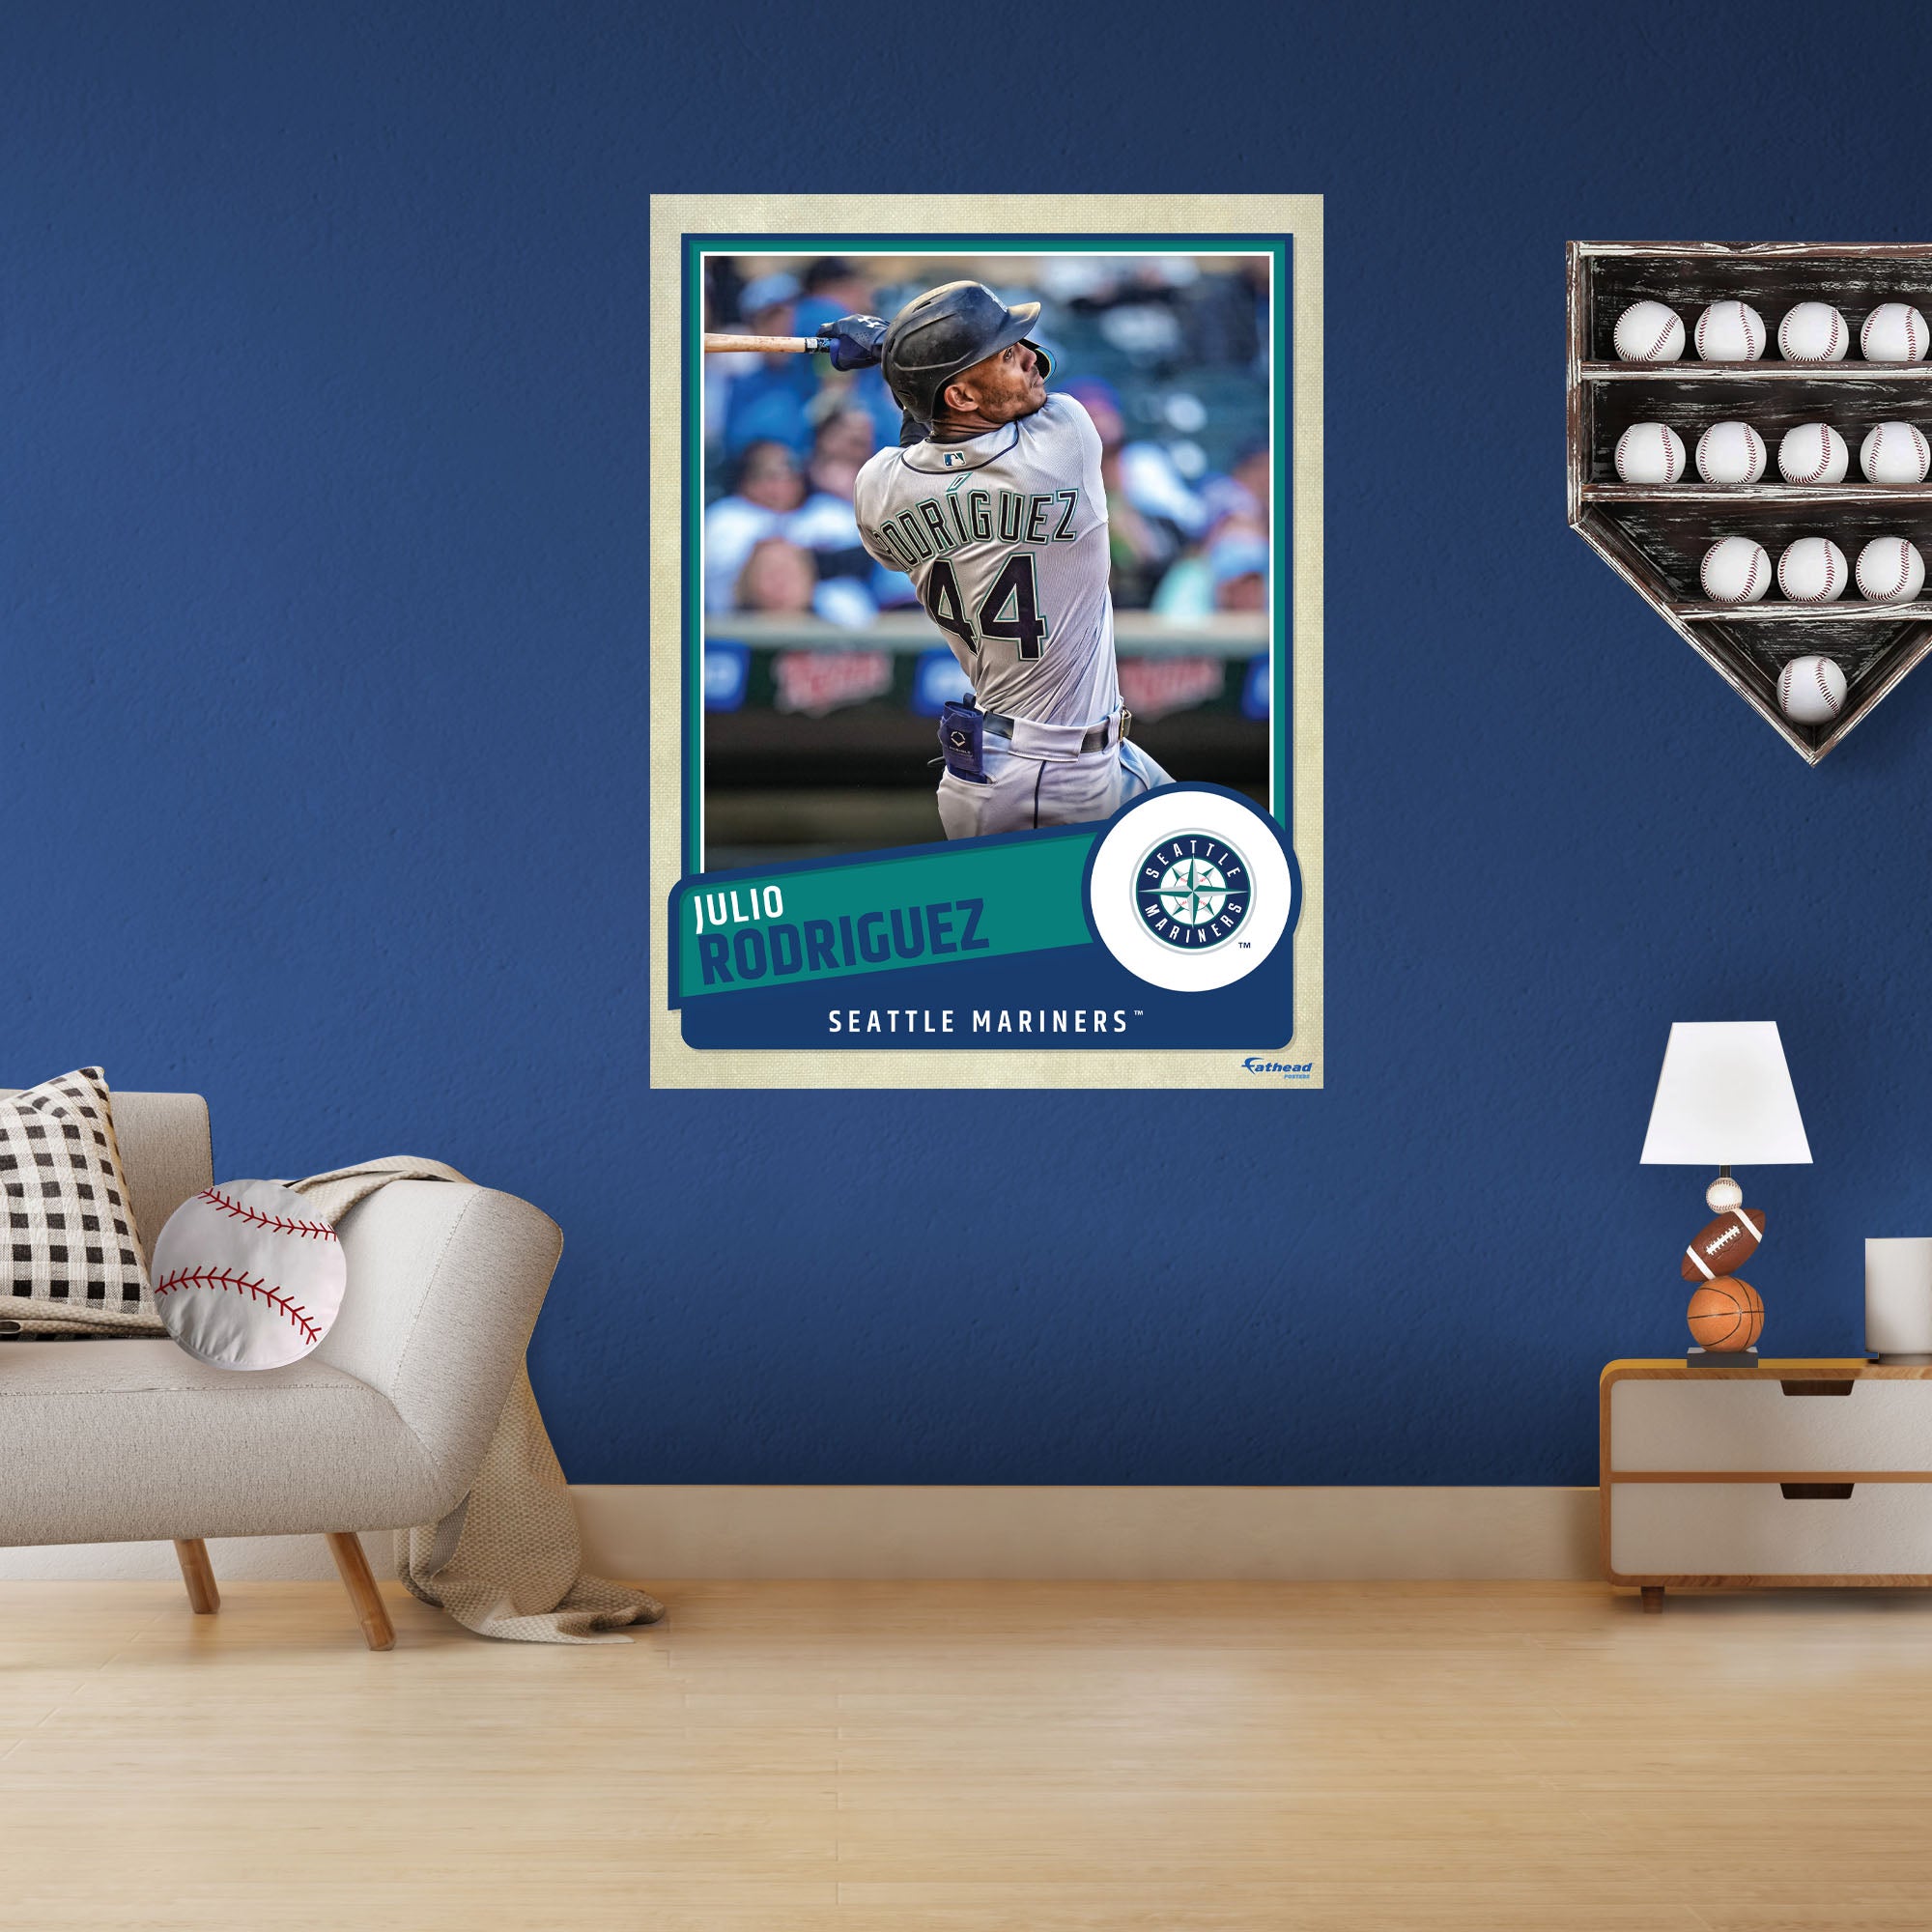  Julio Rodriguez Sports Posters Baseball Canvas Poster